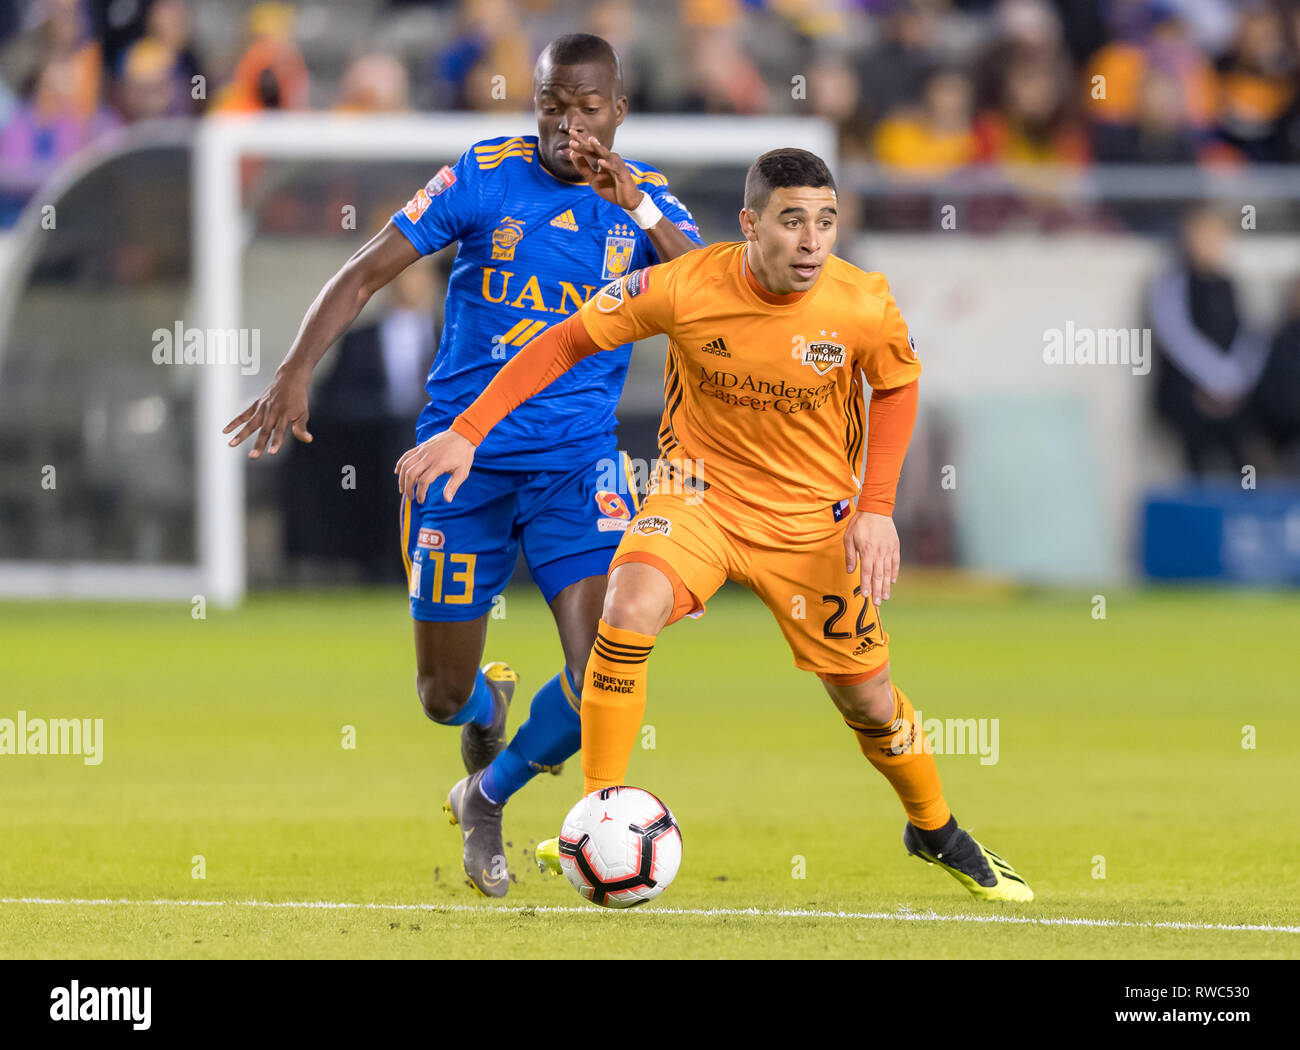 Houston, Texas, USA. 05th Mar, 2019. February 26, 2019: Houston Dynamo midfielder Matias Vera (22) and UANL Tigres forward Enner Valencia (13) battle for the ball during the CONCACAF Champions League quarter finals game 18 leg 1 between UANL Tigres and Houston Dynamo at BBVA Compass Stadium in Houston, Texas The score at the half 0-0 © Maria Lysaker/CSM. Credit: Cal Sport Media/Alamy Live News Stock Photo